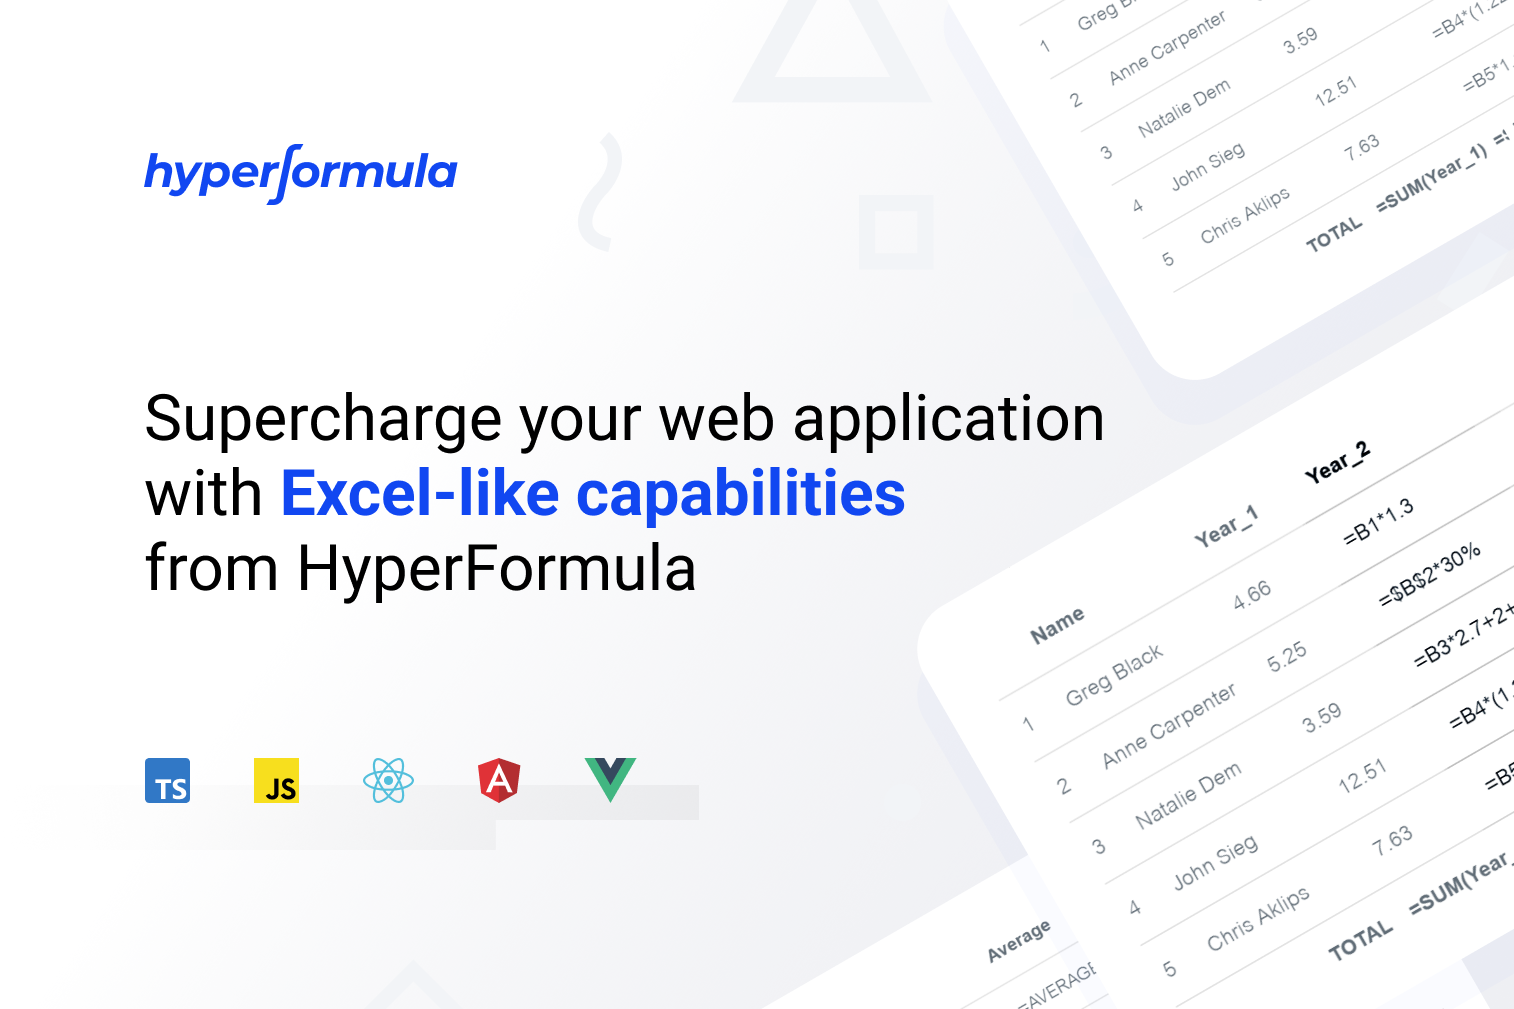 Supercharge your web application with Excel-like capabilities from HyperFormula